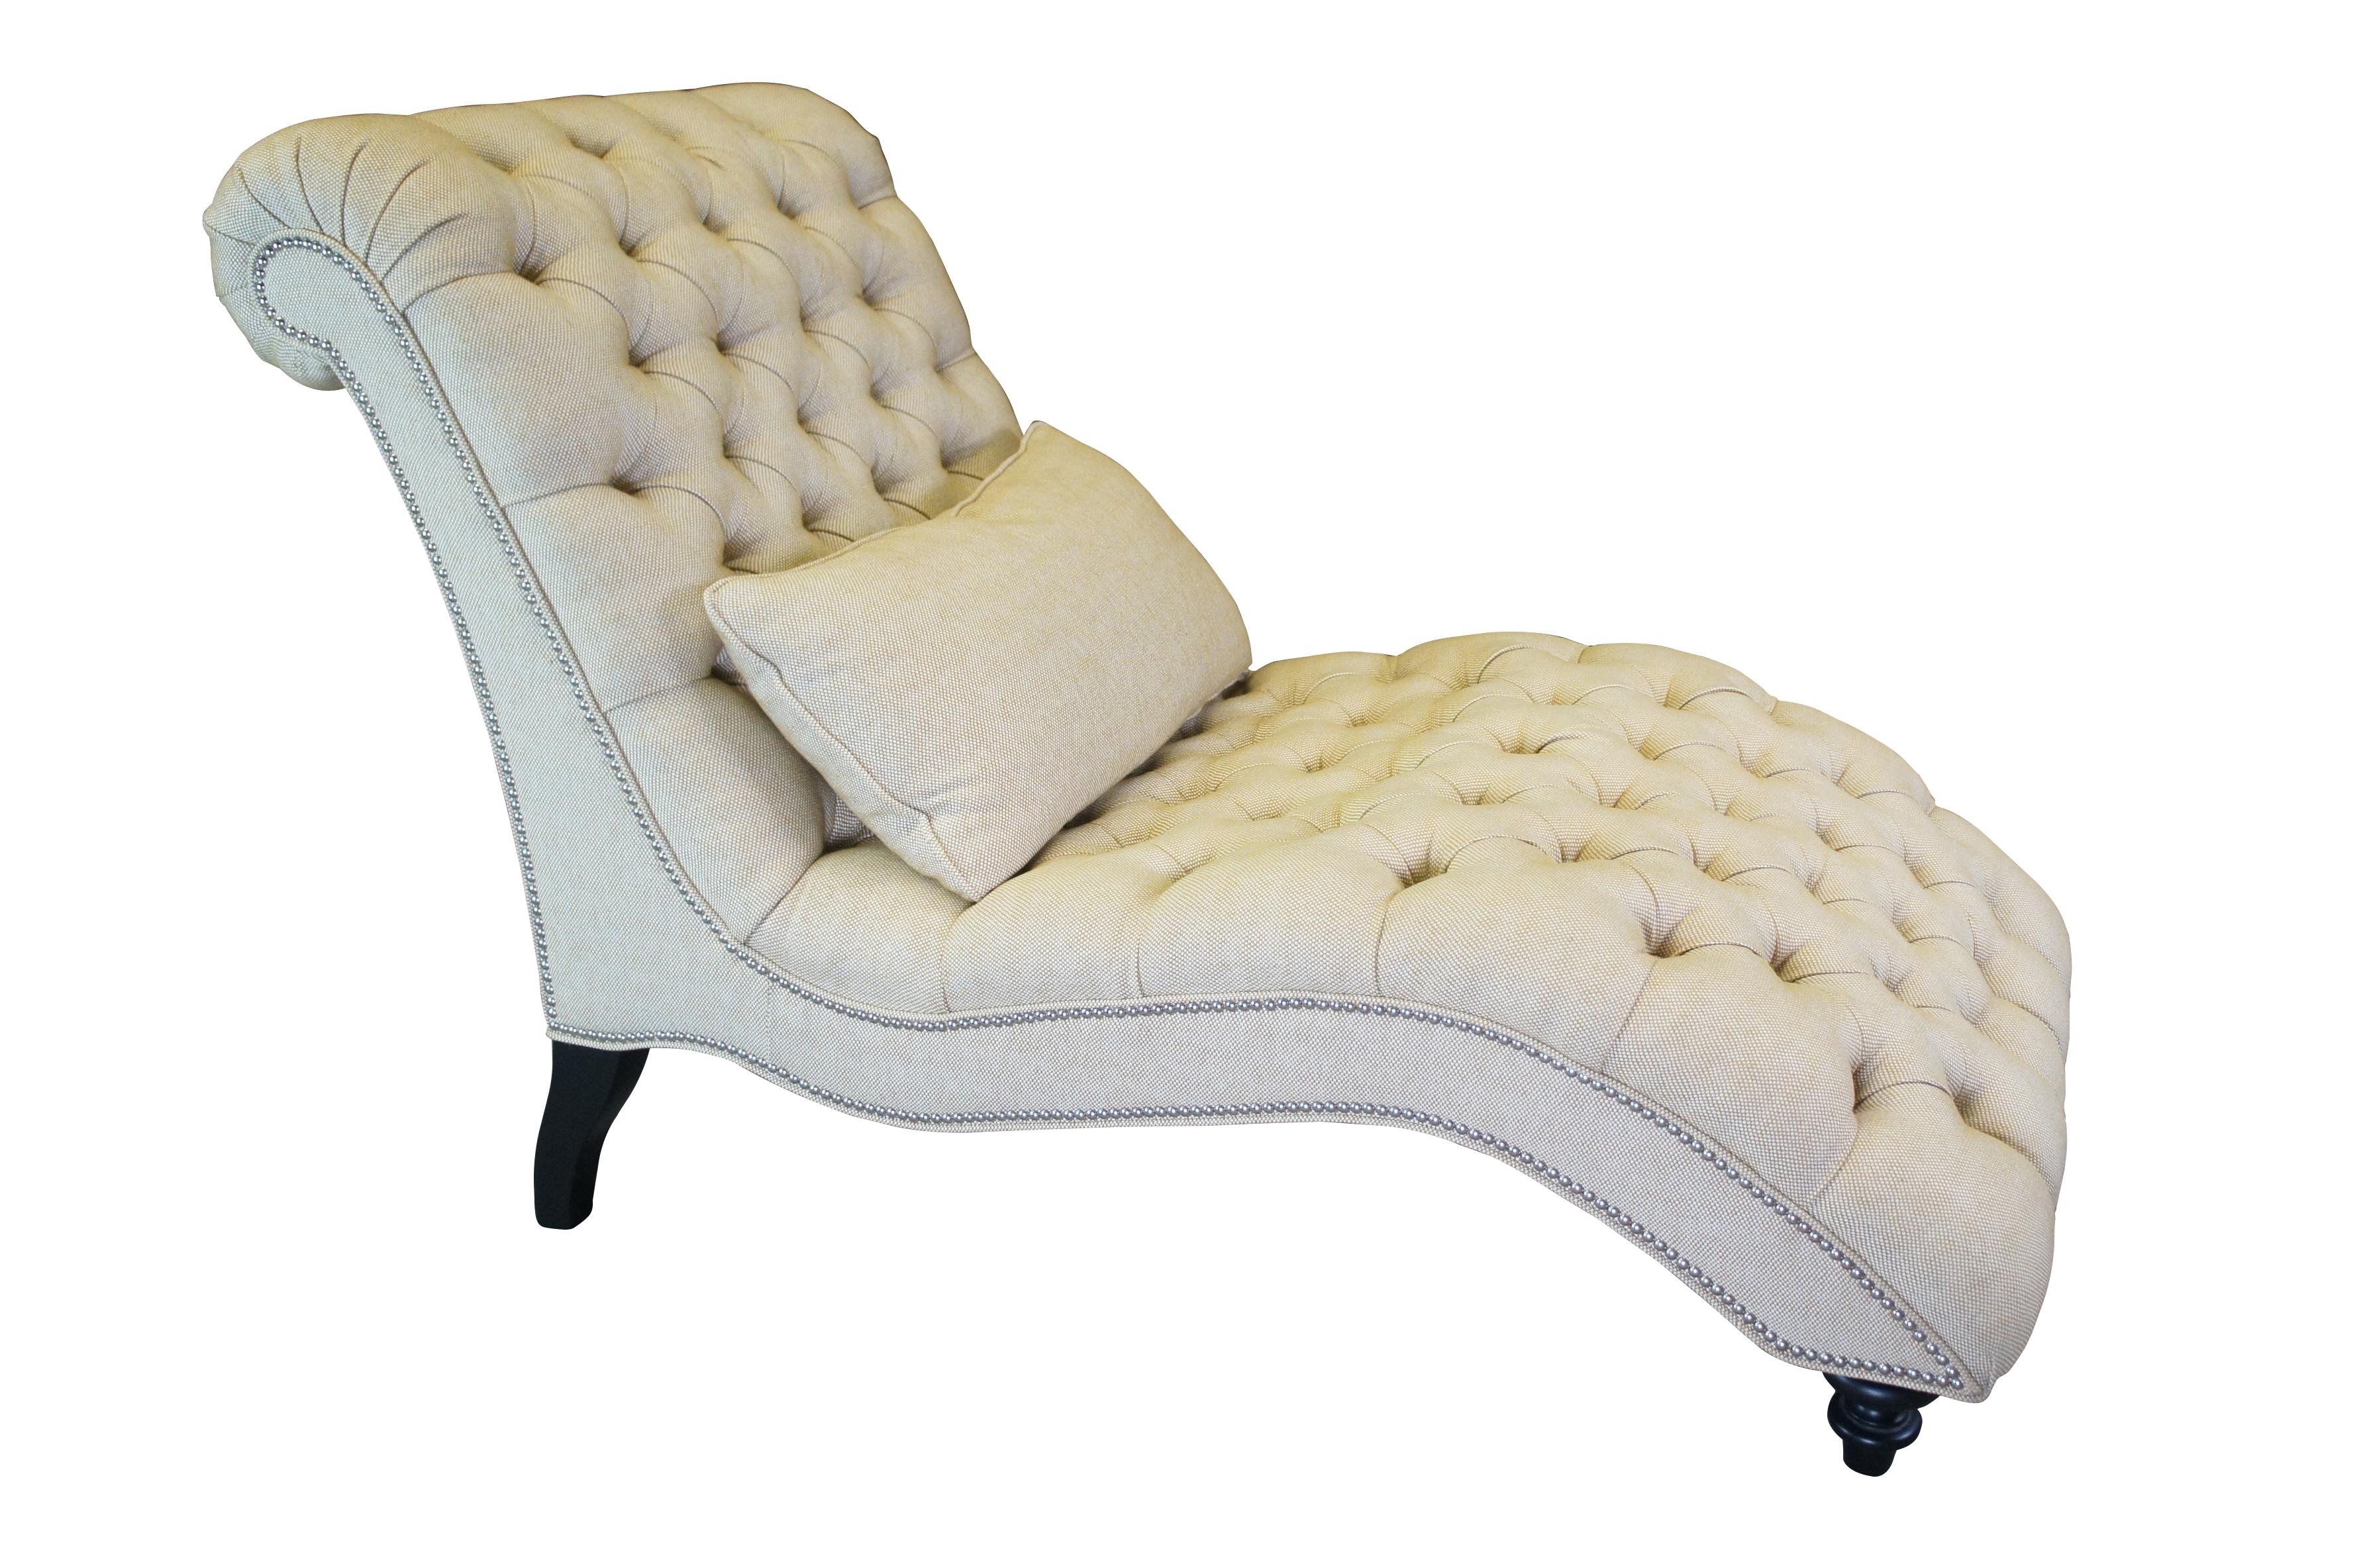 French Provincial Lexington Upholstery Traditional Beige Tufted Althena Chaise Lounge 7802-75 For Sale